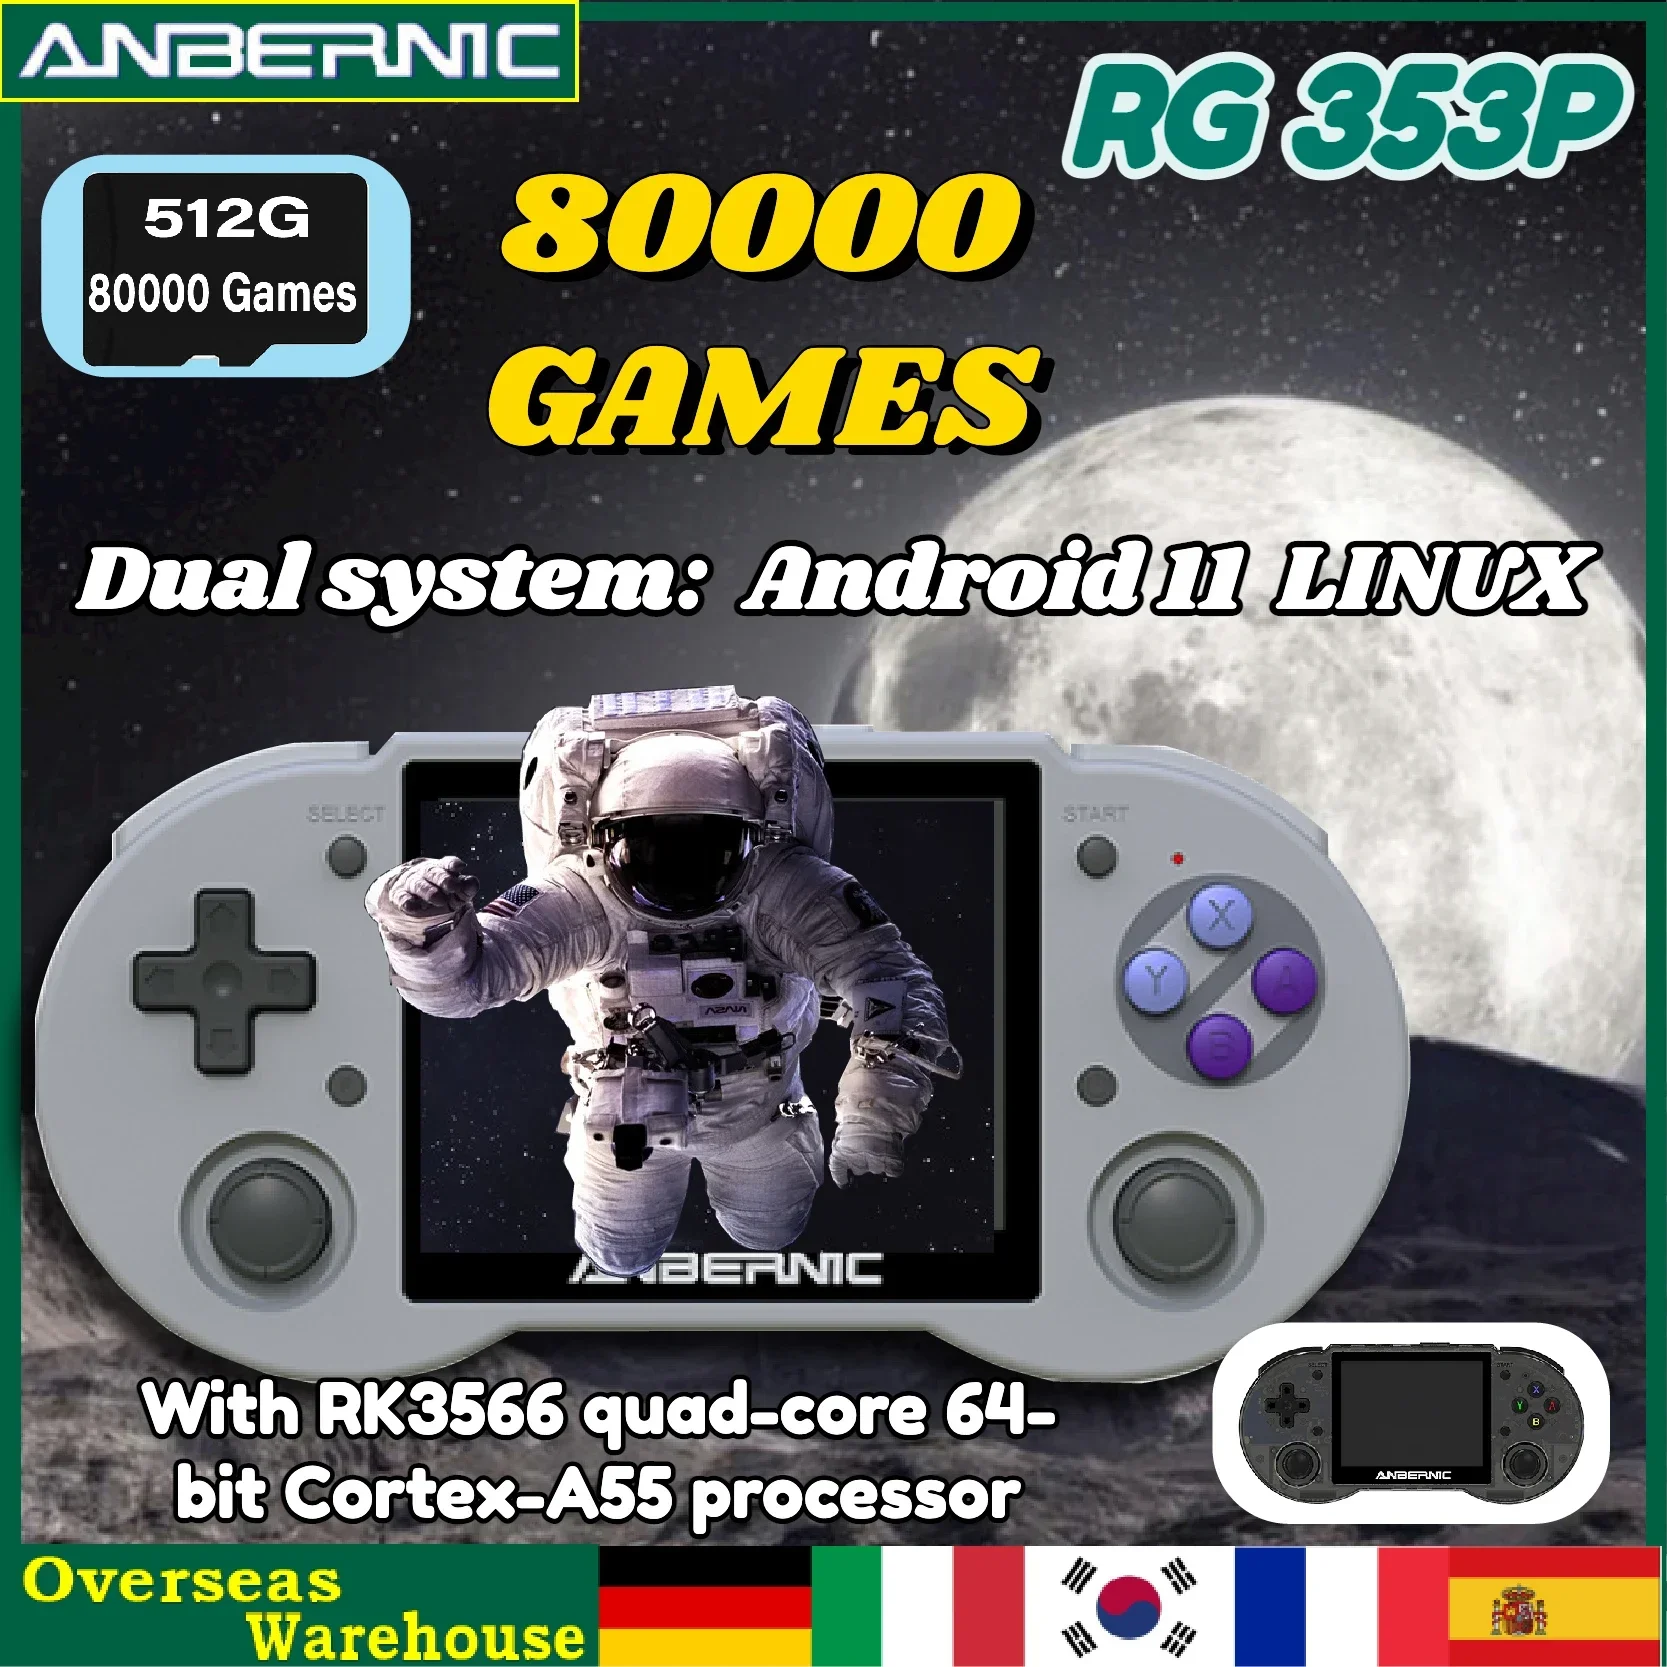 

512G ANBERNIC RG353P Retro Handheld Game Console 3.5 Inch Multi-touch Screen Android Linux System HDMI-compatible 80000 Games